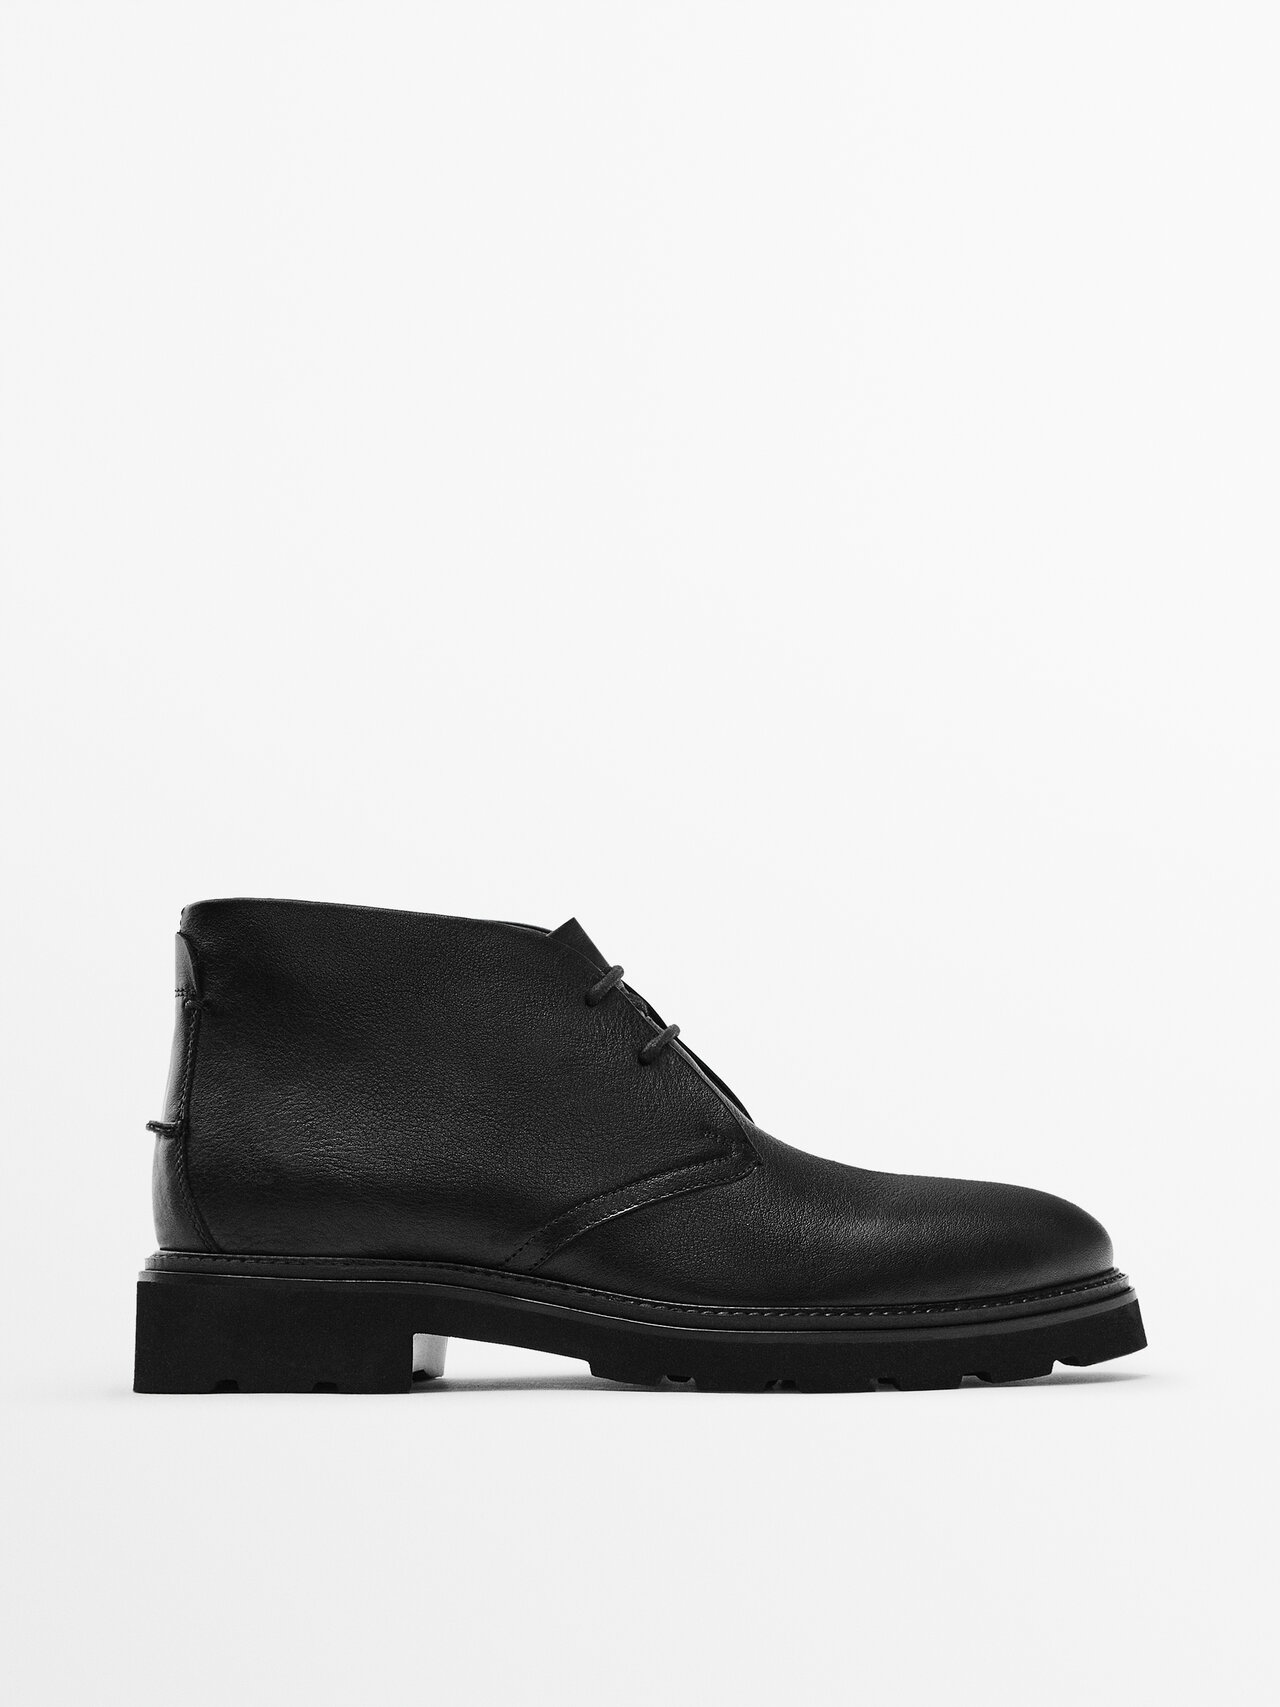 Massimo Dutti Nappa Leather Ankle Boots In Black